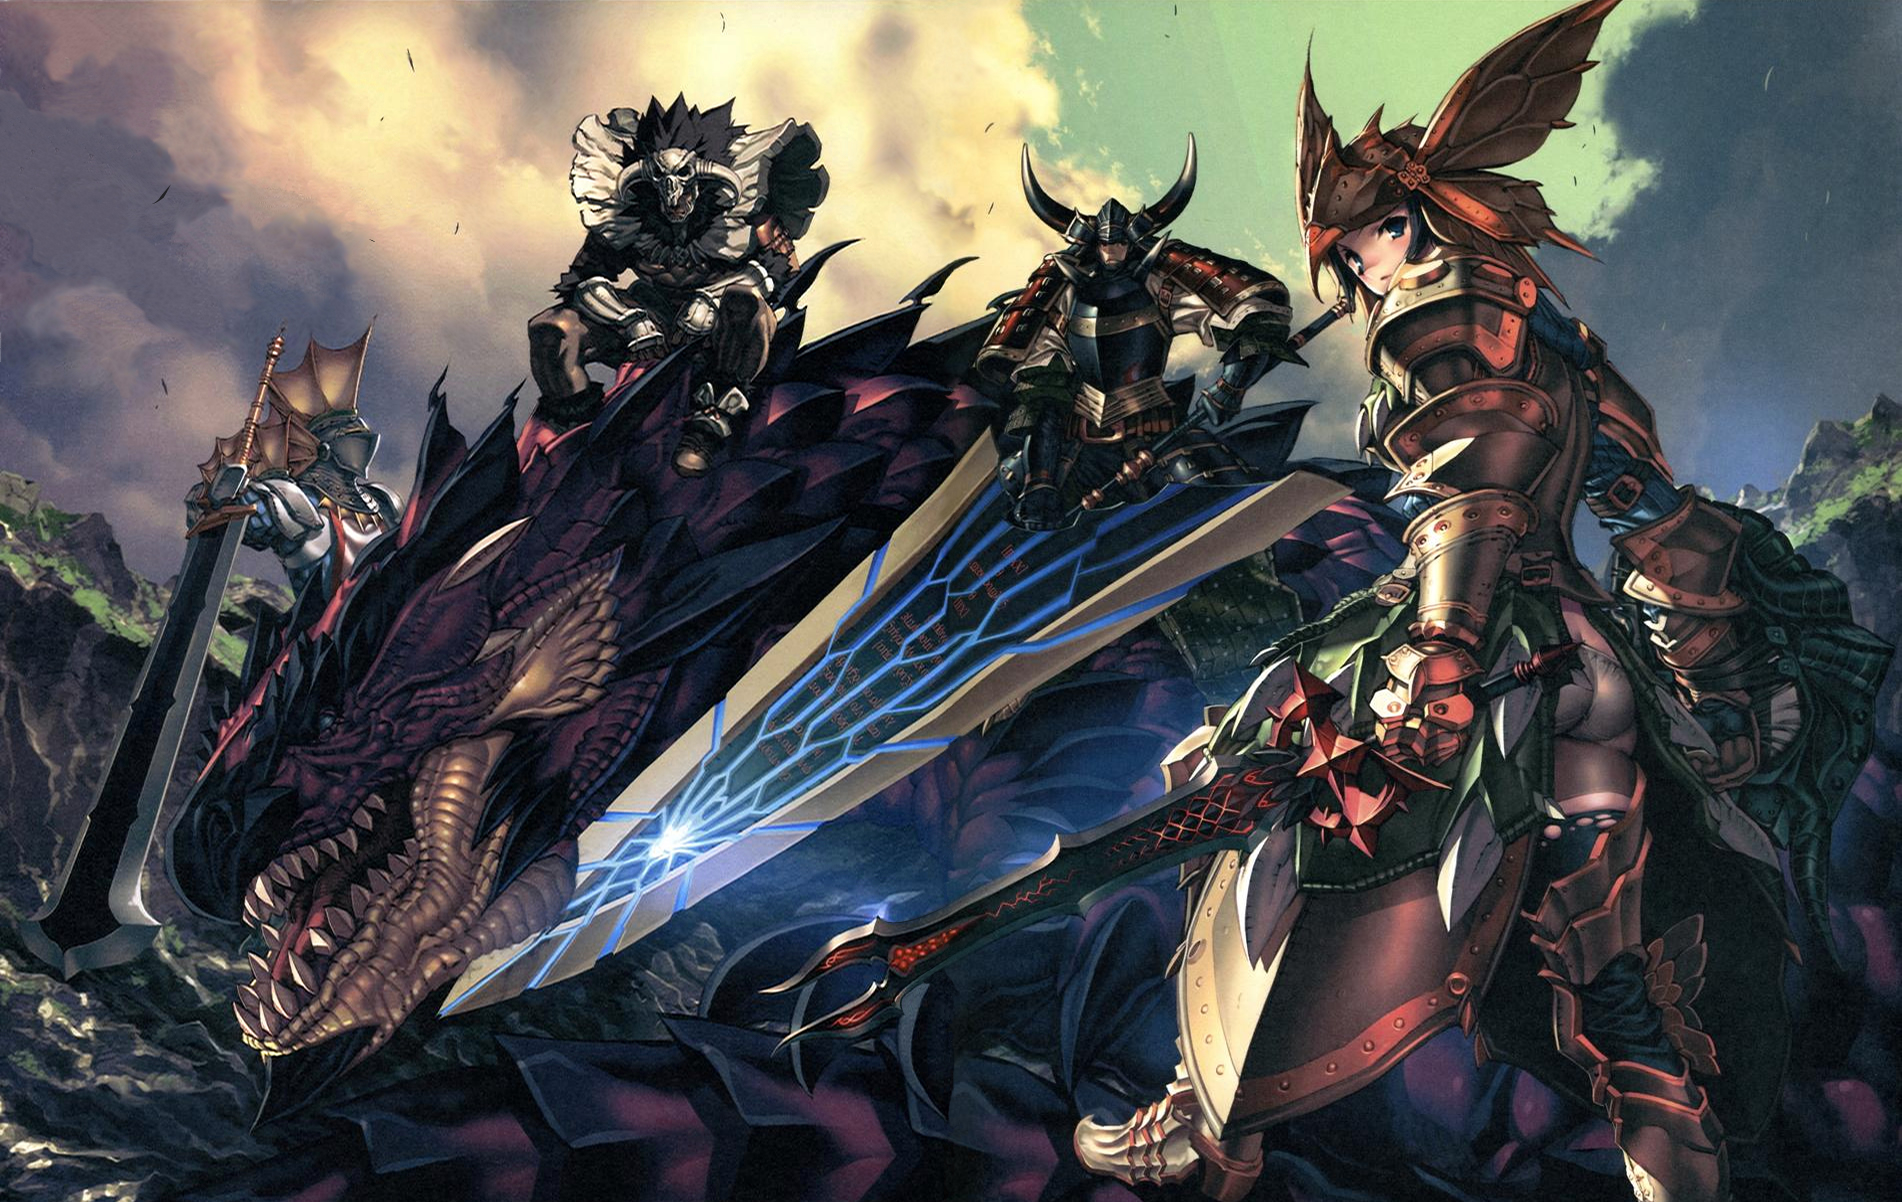 monster hunter wallpaper,action adventure game,cg artwork,strategy video game,fictional character,warlord